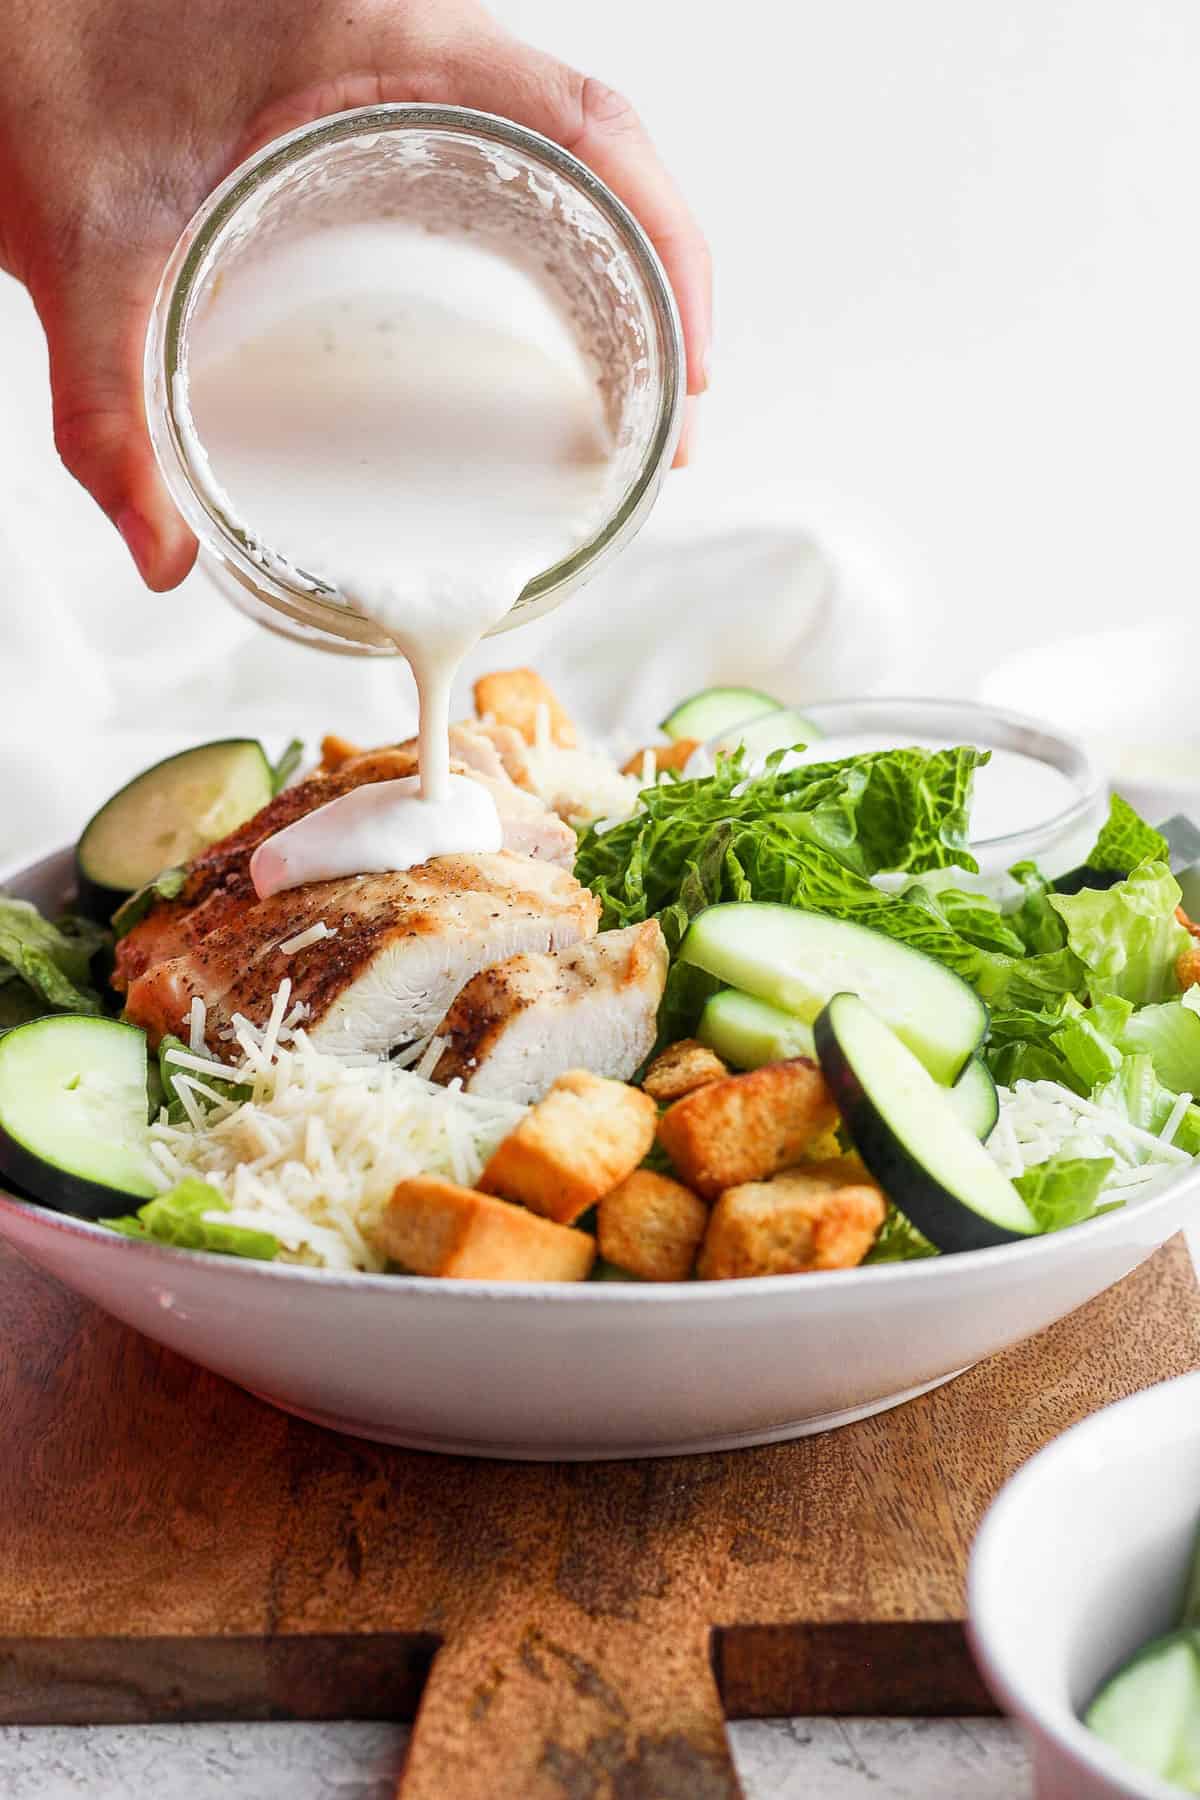 https://fitfoodiefinds.com/wp-content/uploads/2021/05/chicken-caesar-salad-13-scaled.jpg